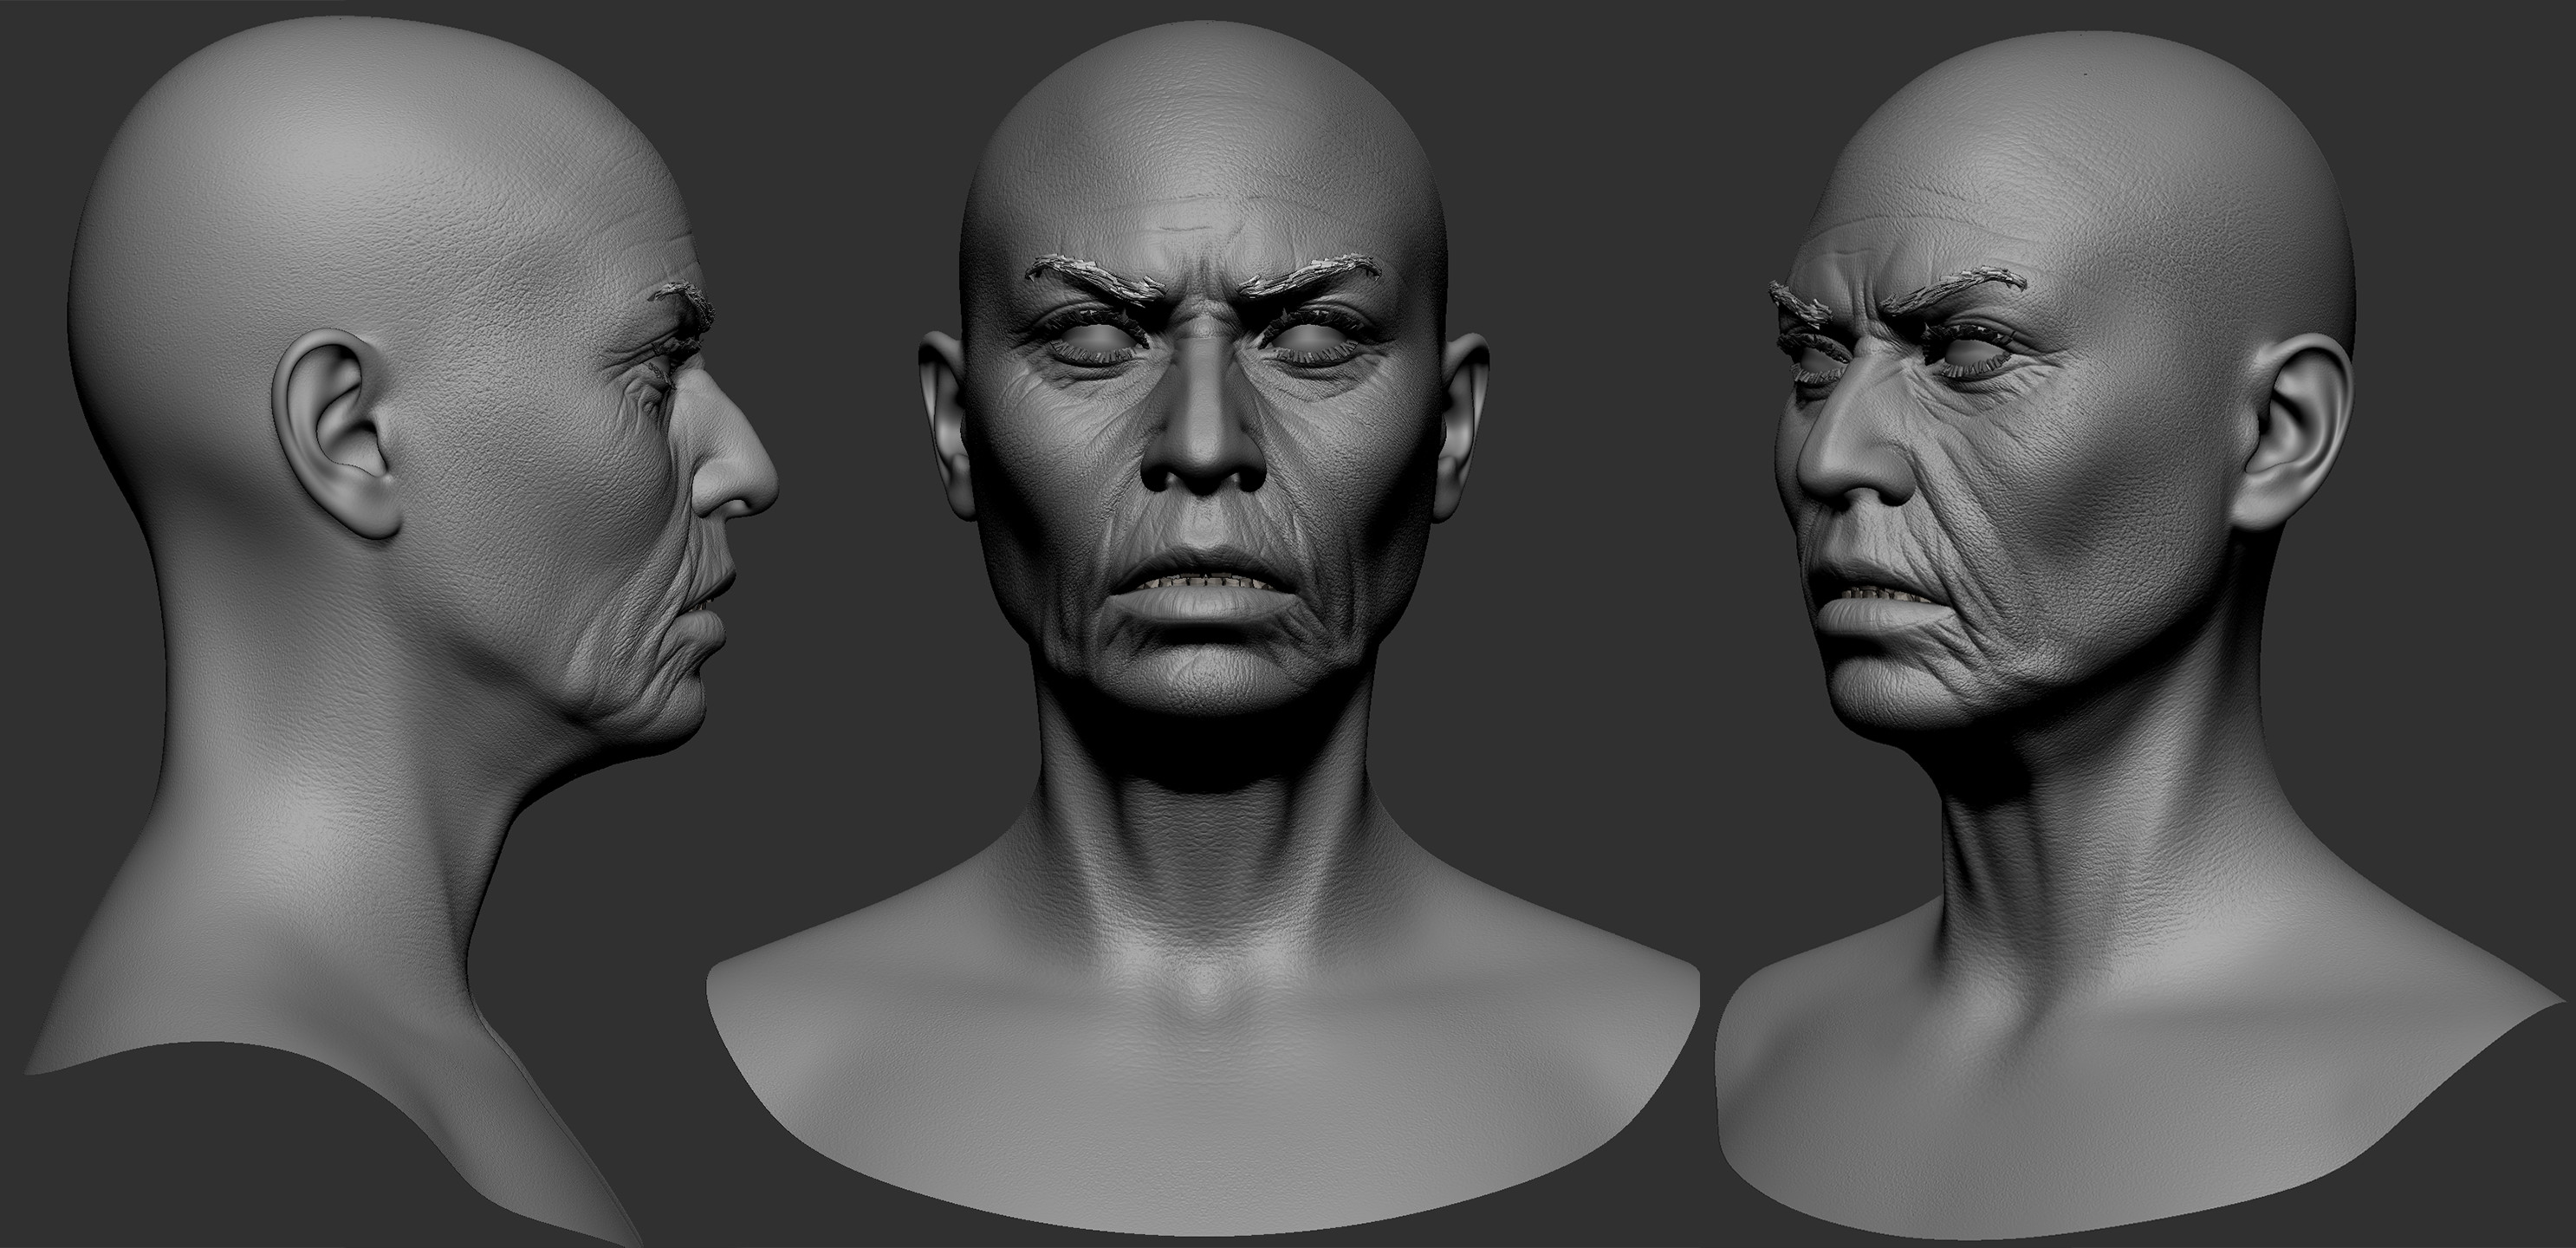 High poly model in Zbrush. Face details were projected with zWrap and Substance Painter